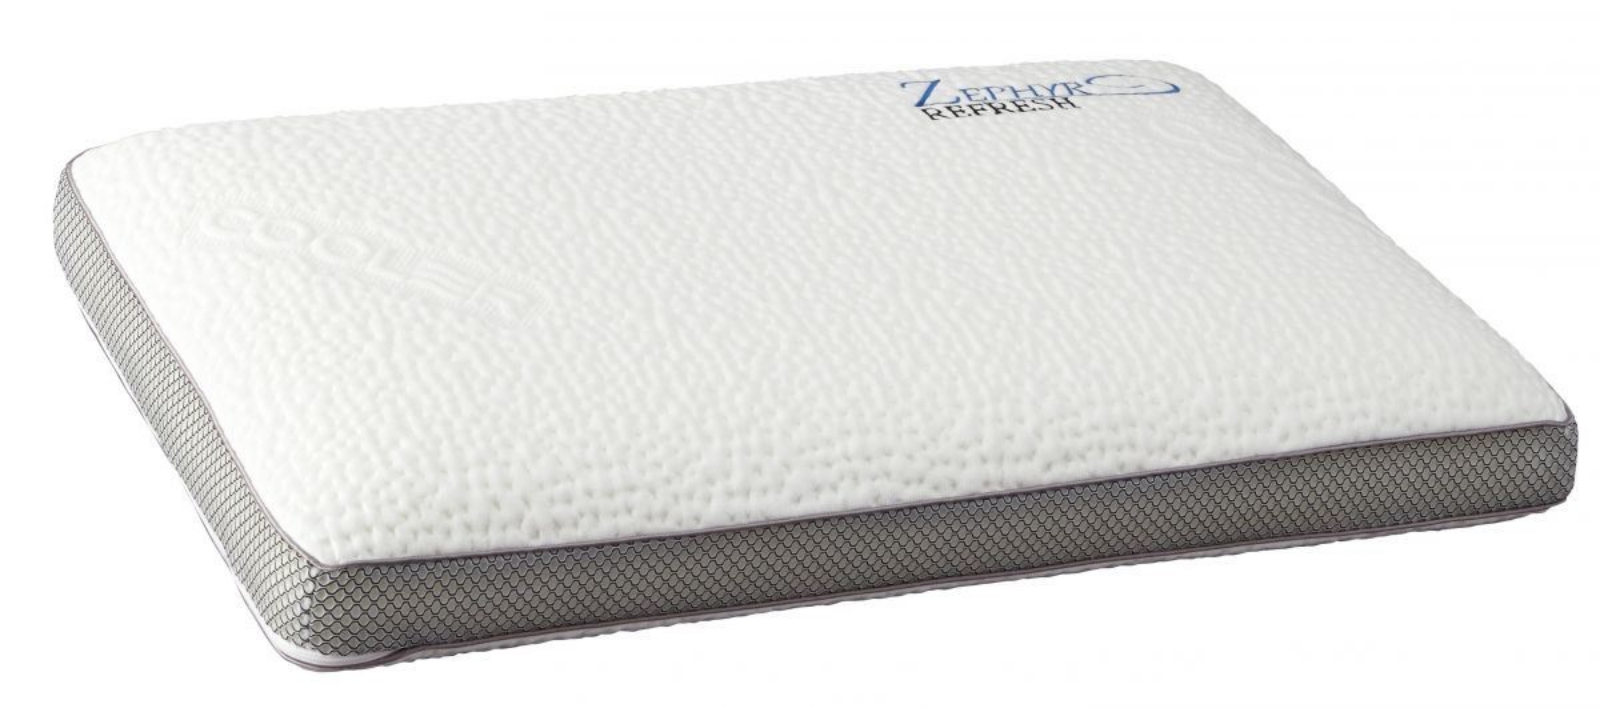 Picture of Zephyr Refresh Bed Pillow